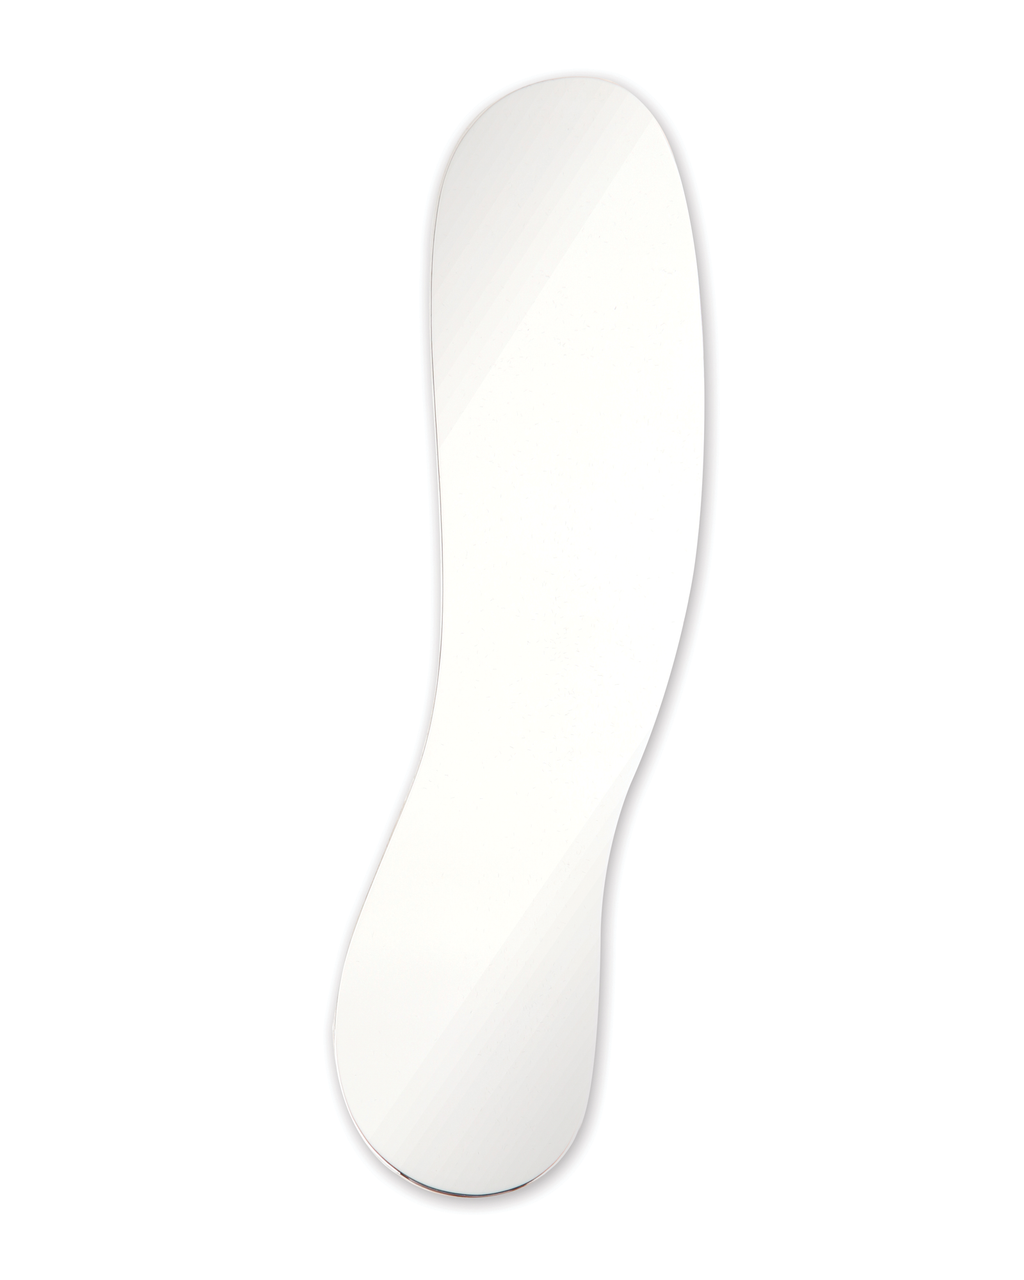 One-Sided Occlusal Intra-Oral Mirror (2FC - Adult)